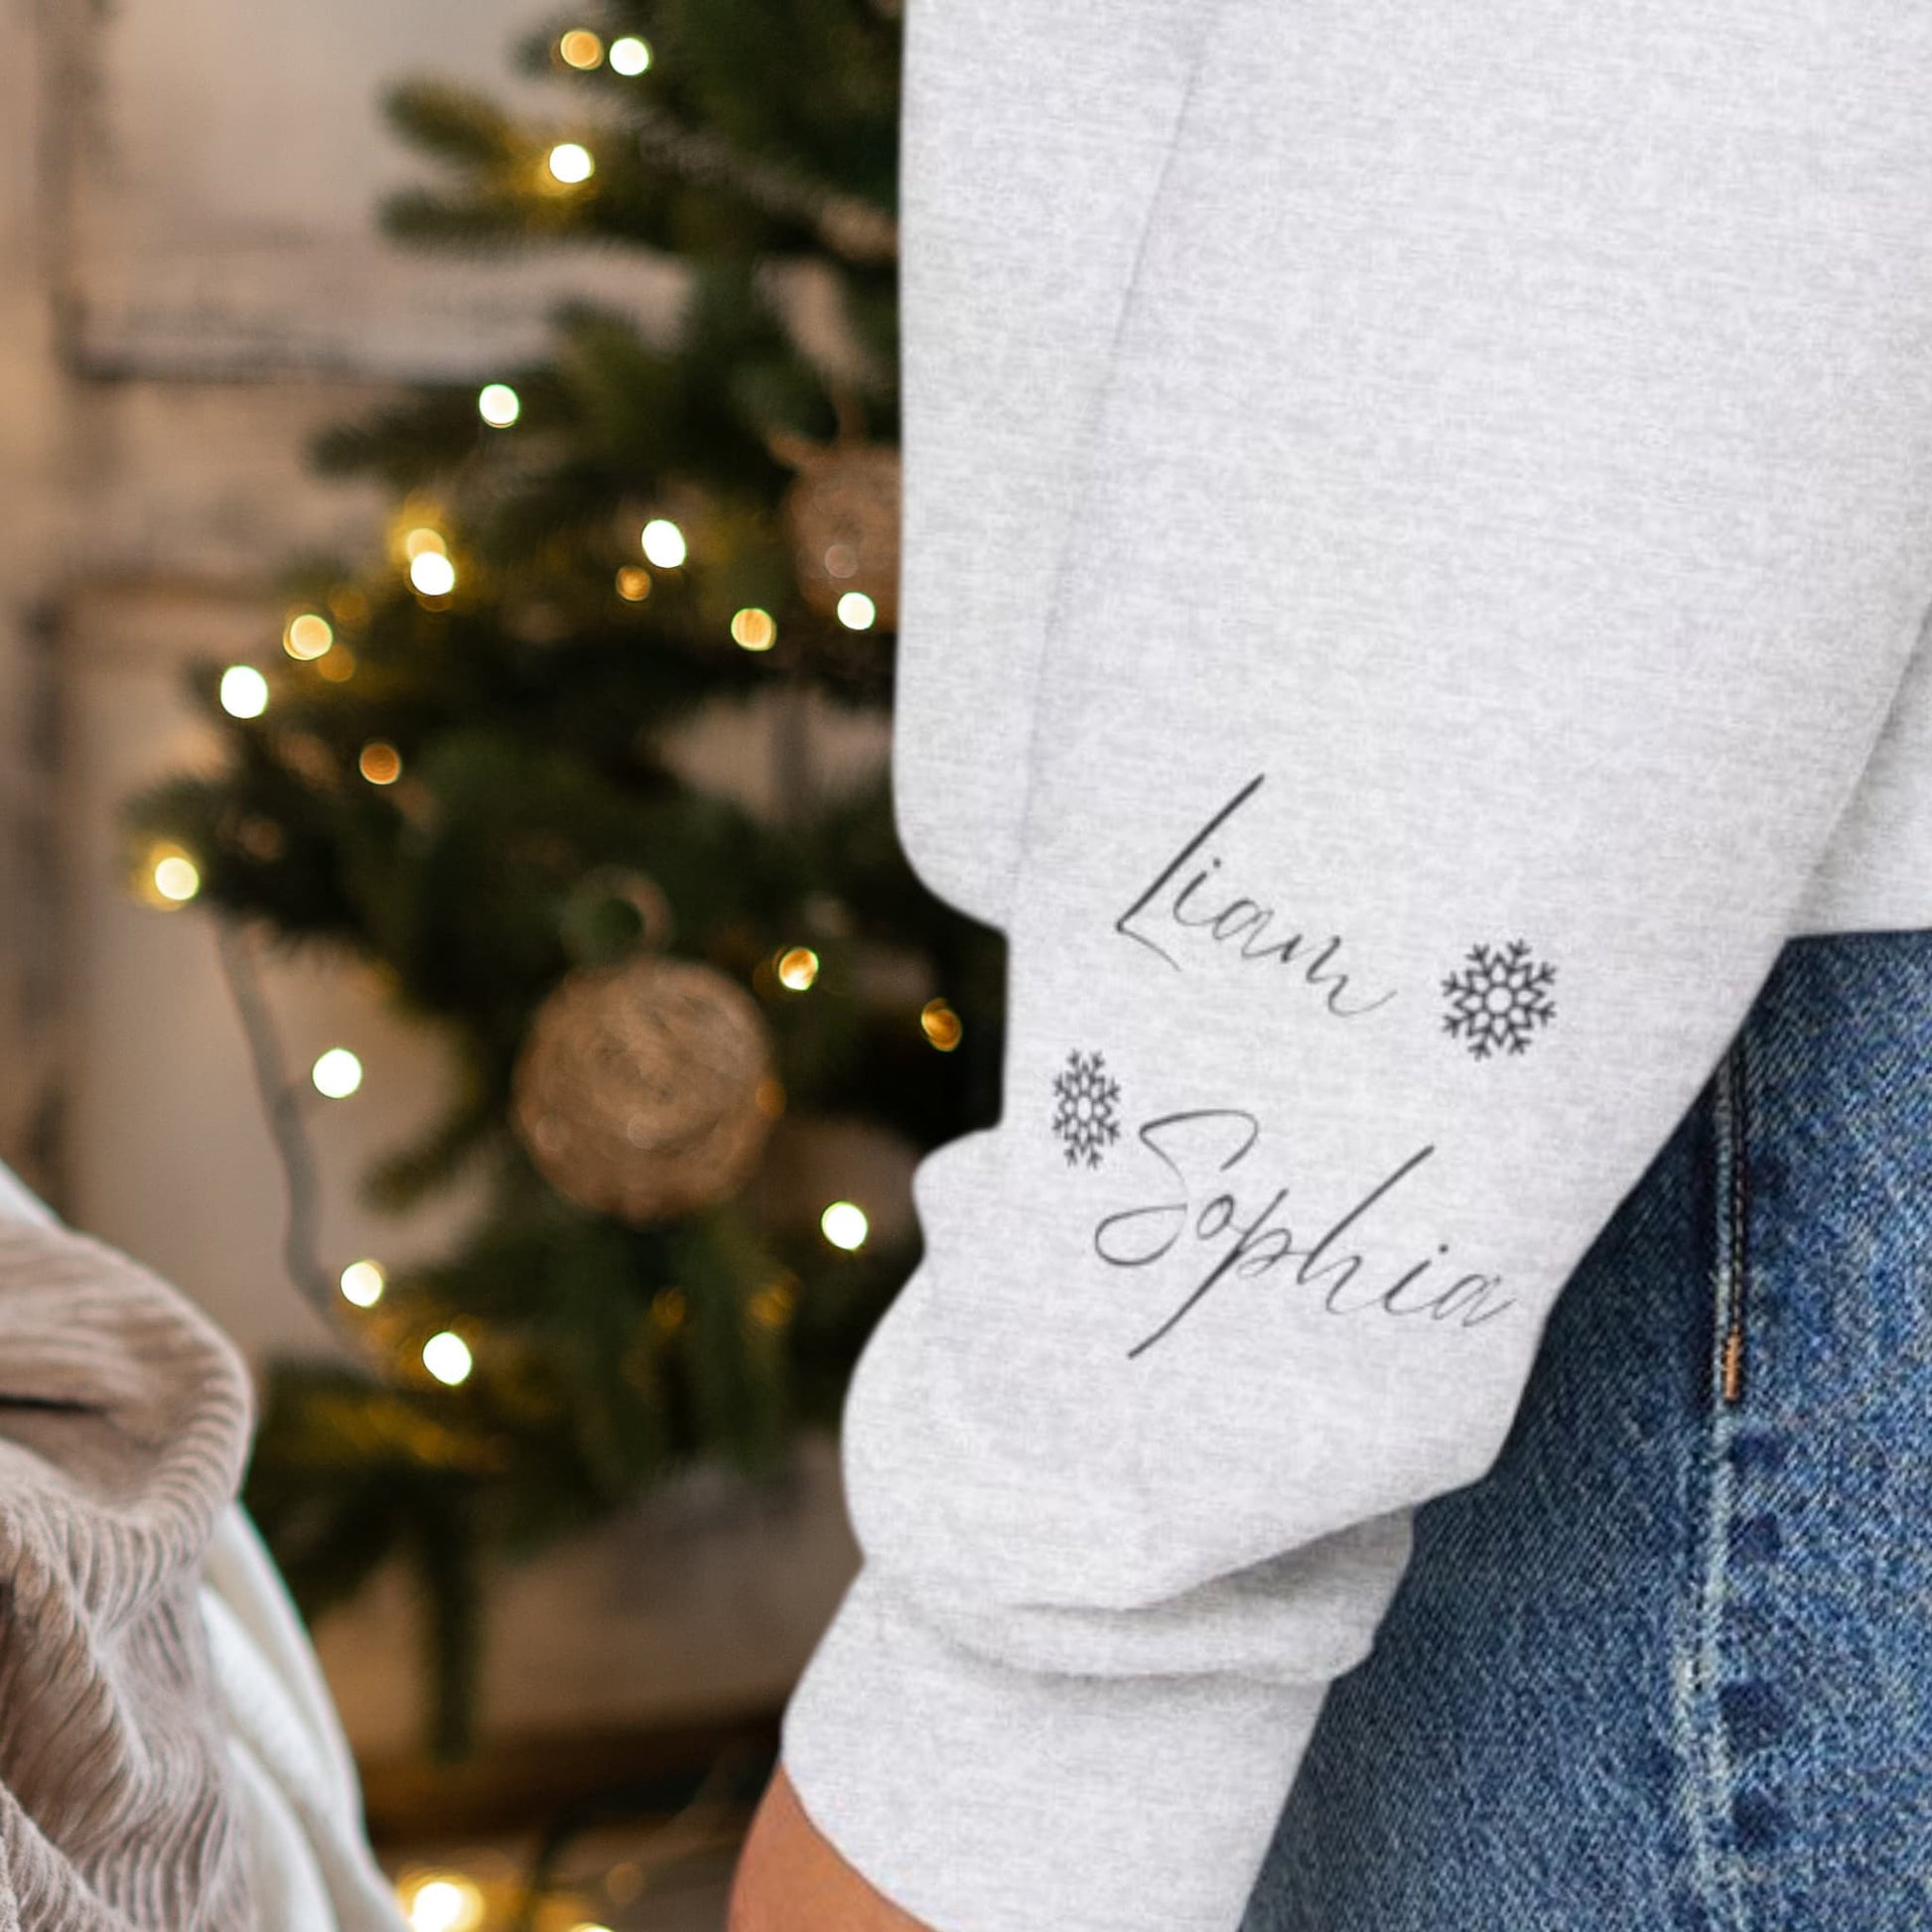 Close-up view of the sleeve design on the Alaskan Mother Personalized Crewneck Sweatshirt, emphasizing the personalized kids' names and snowflake motif.